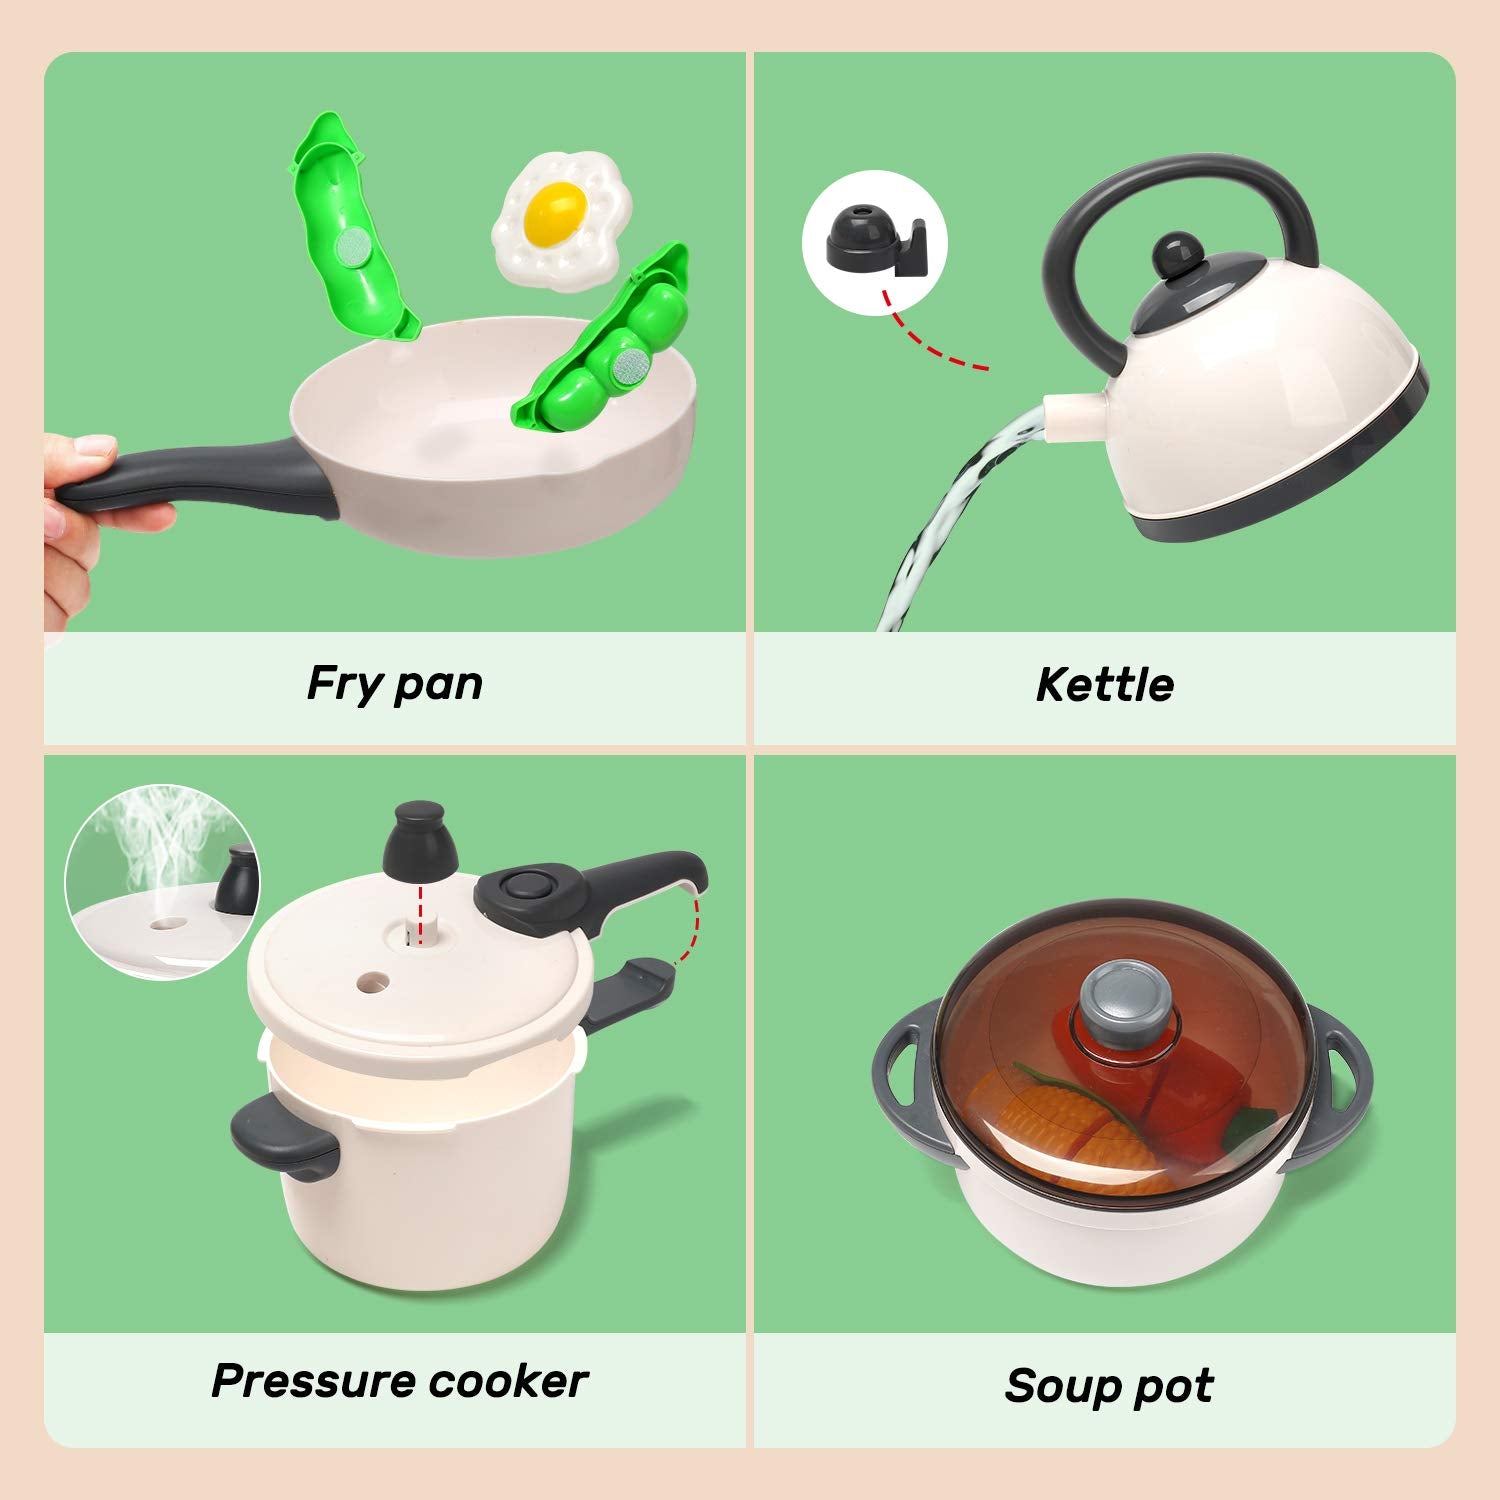 CUTE STONE Pretend Play Kitchen Toy with Cookware Steam Pressure Pot and Electronic Induction Cooktop, Cooking Utensils, Toy Cutlery, Cut Play Food, Shopping Basket Learning Gift for Girls Boys